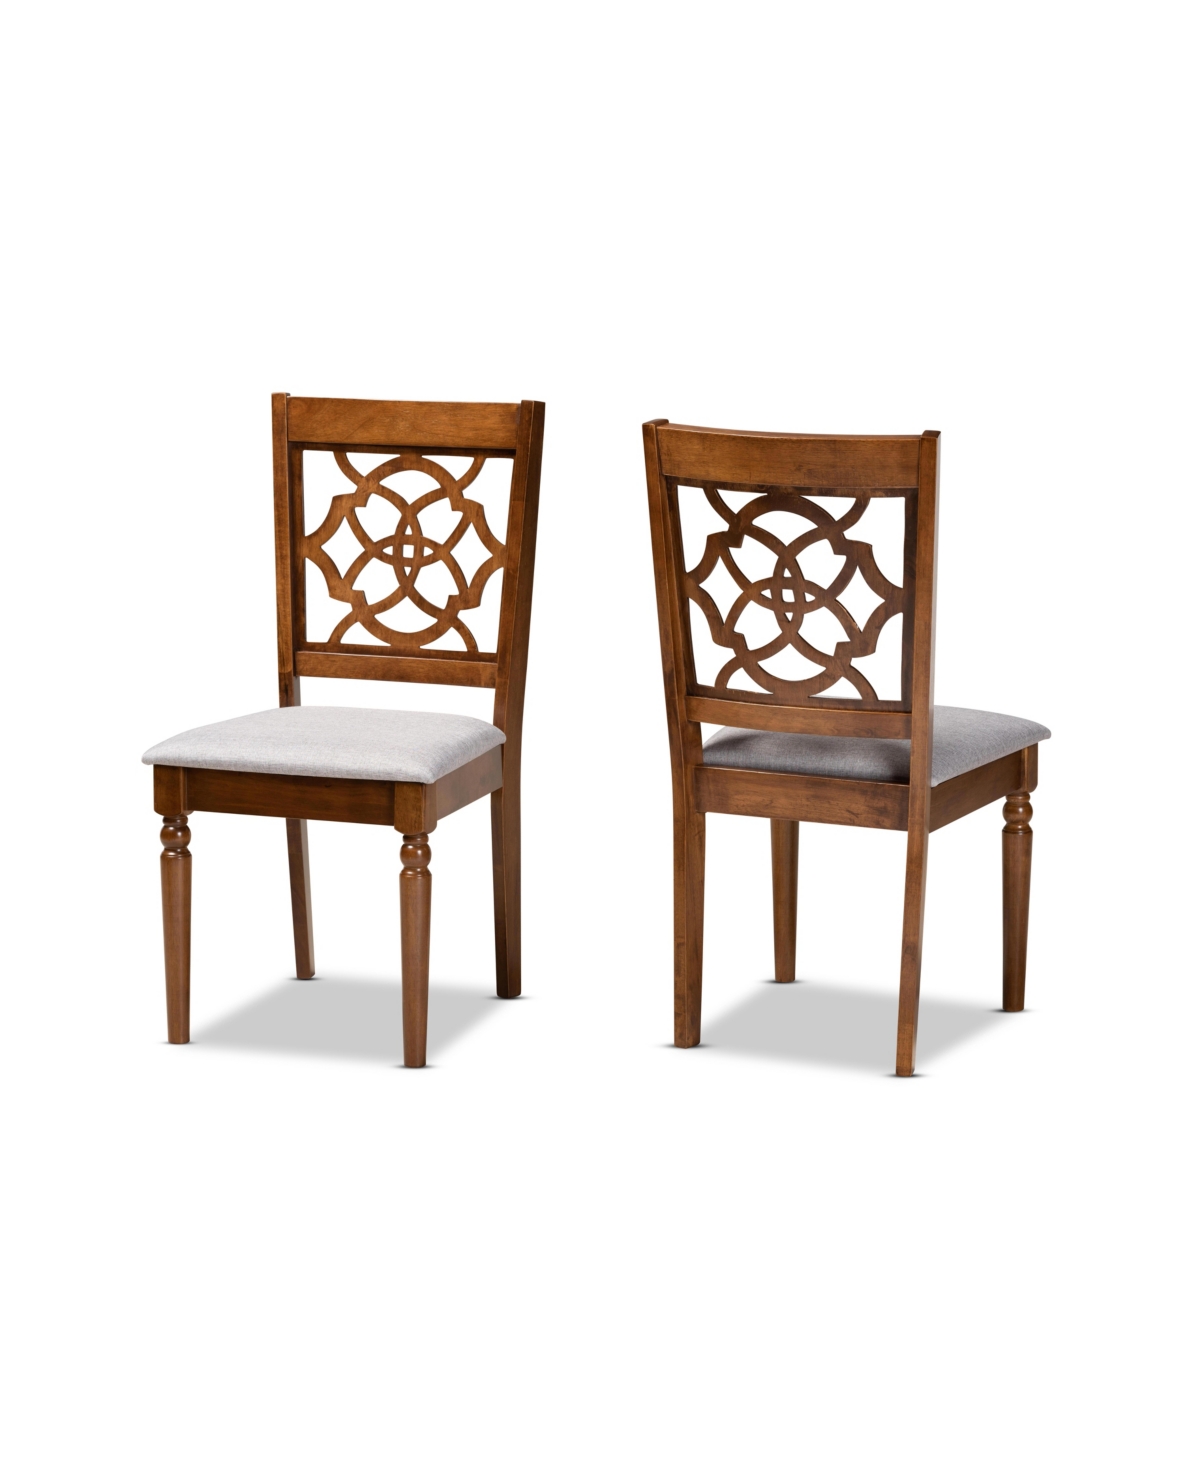 Baxton Studio Renaud Modern And Contemporary Wood Dining Chair Set, 2 Piece In Gray/walnut Brown